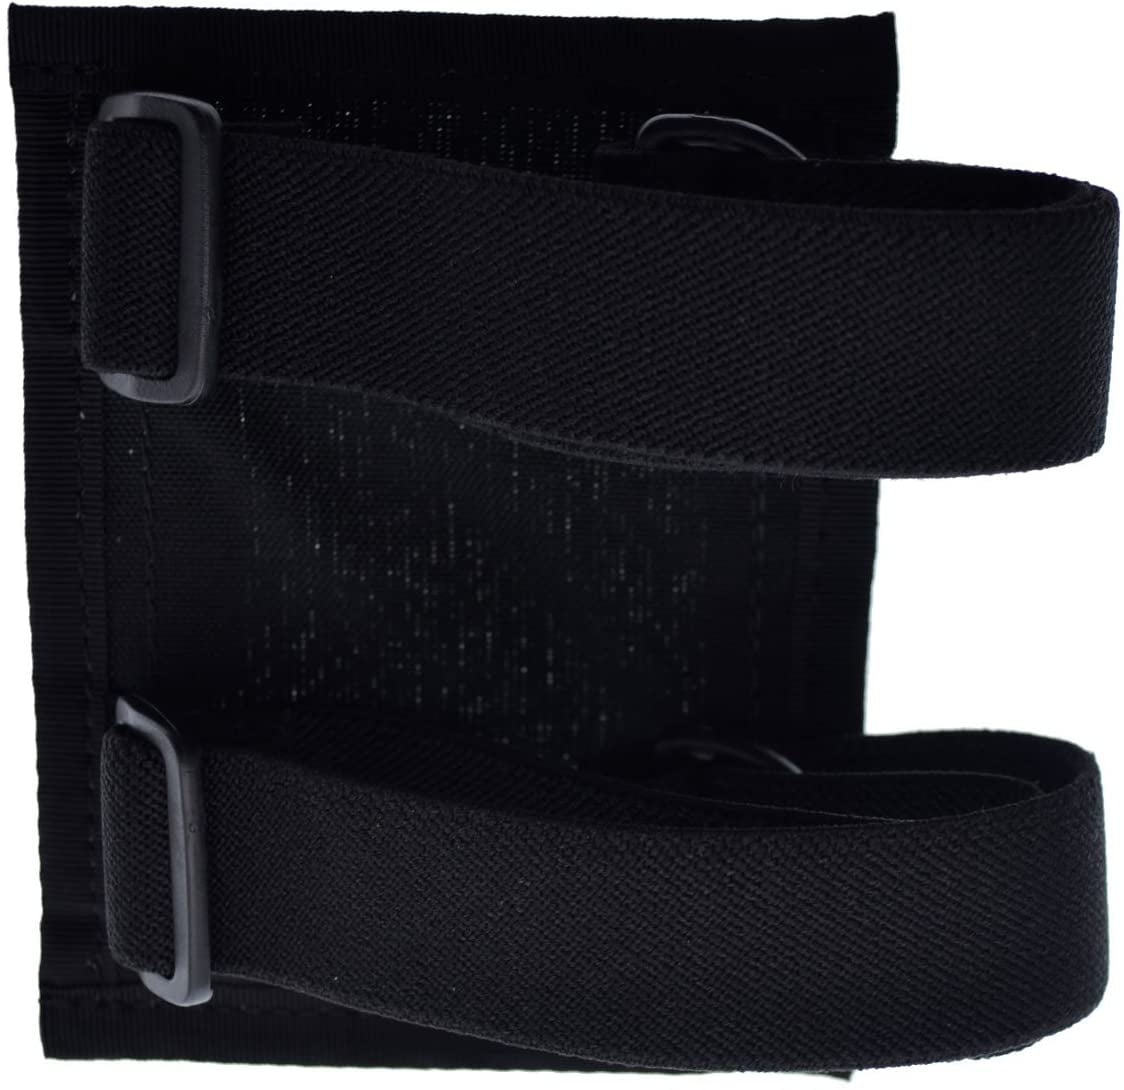 WALLET PROTECTOR Set of Two Heavy Duty Rubber Bands..... 